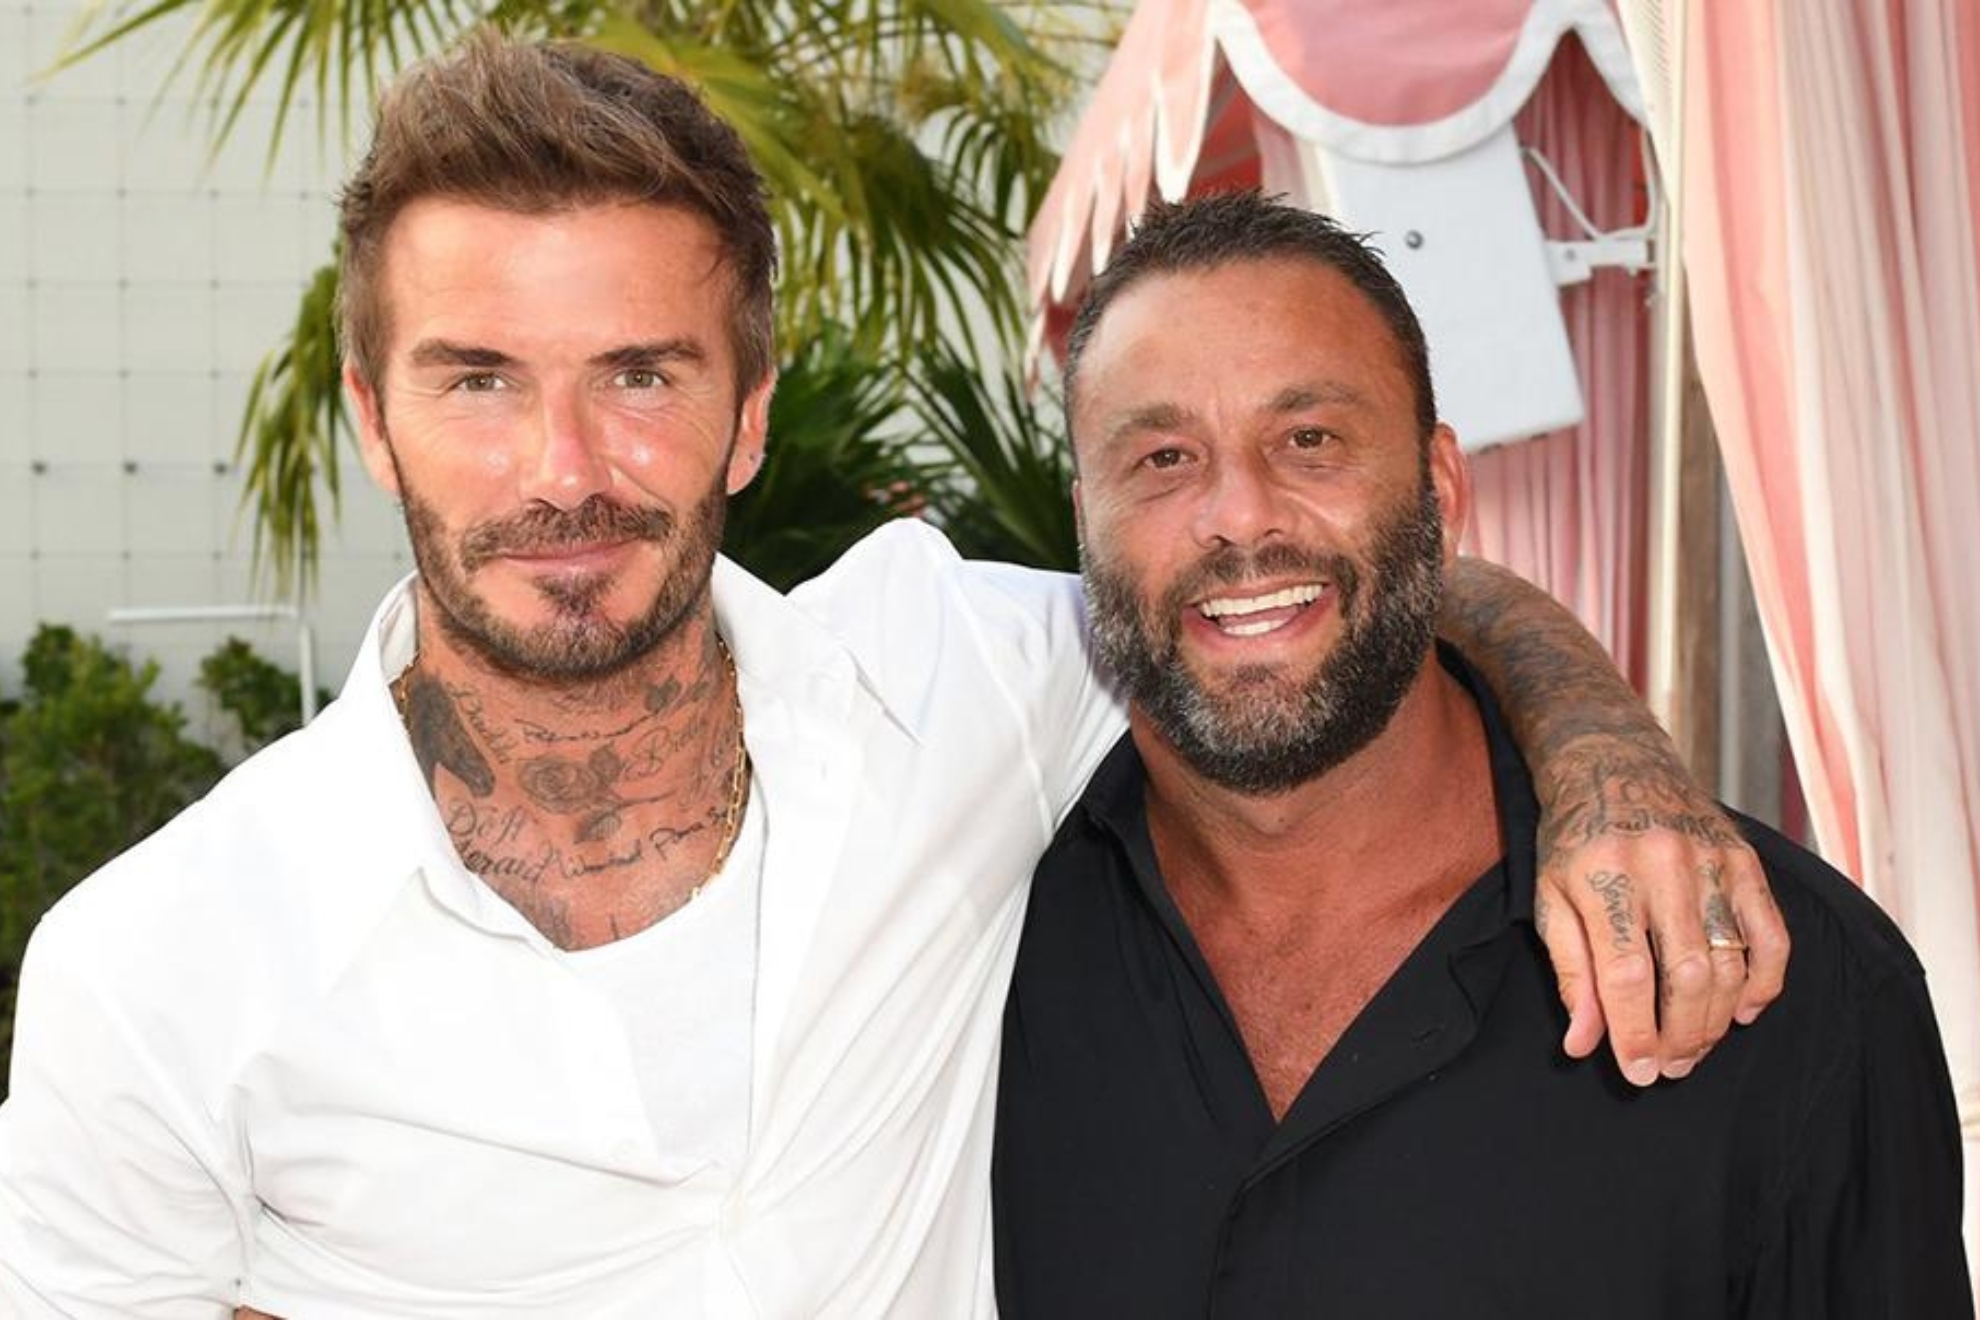 Beckham and Grutman have established a strong friendship over the years